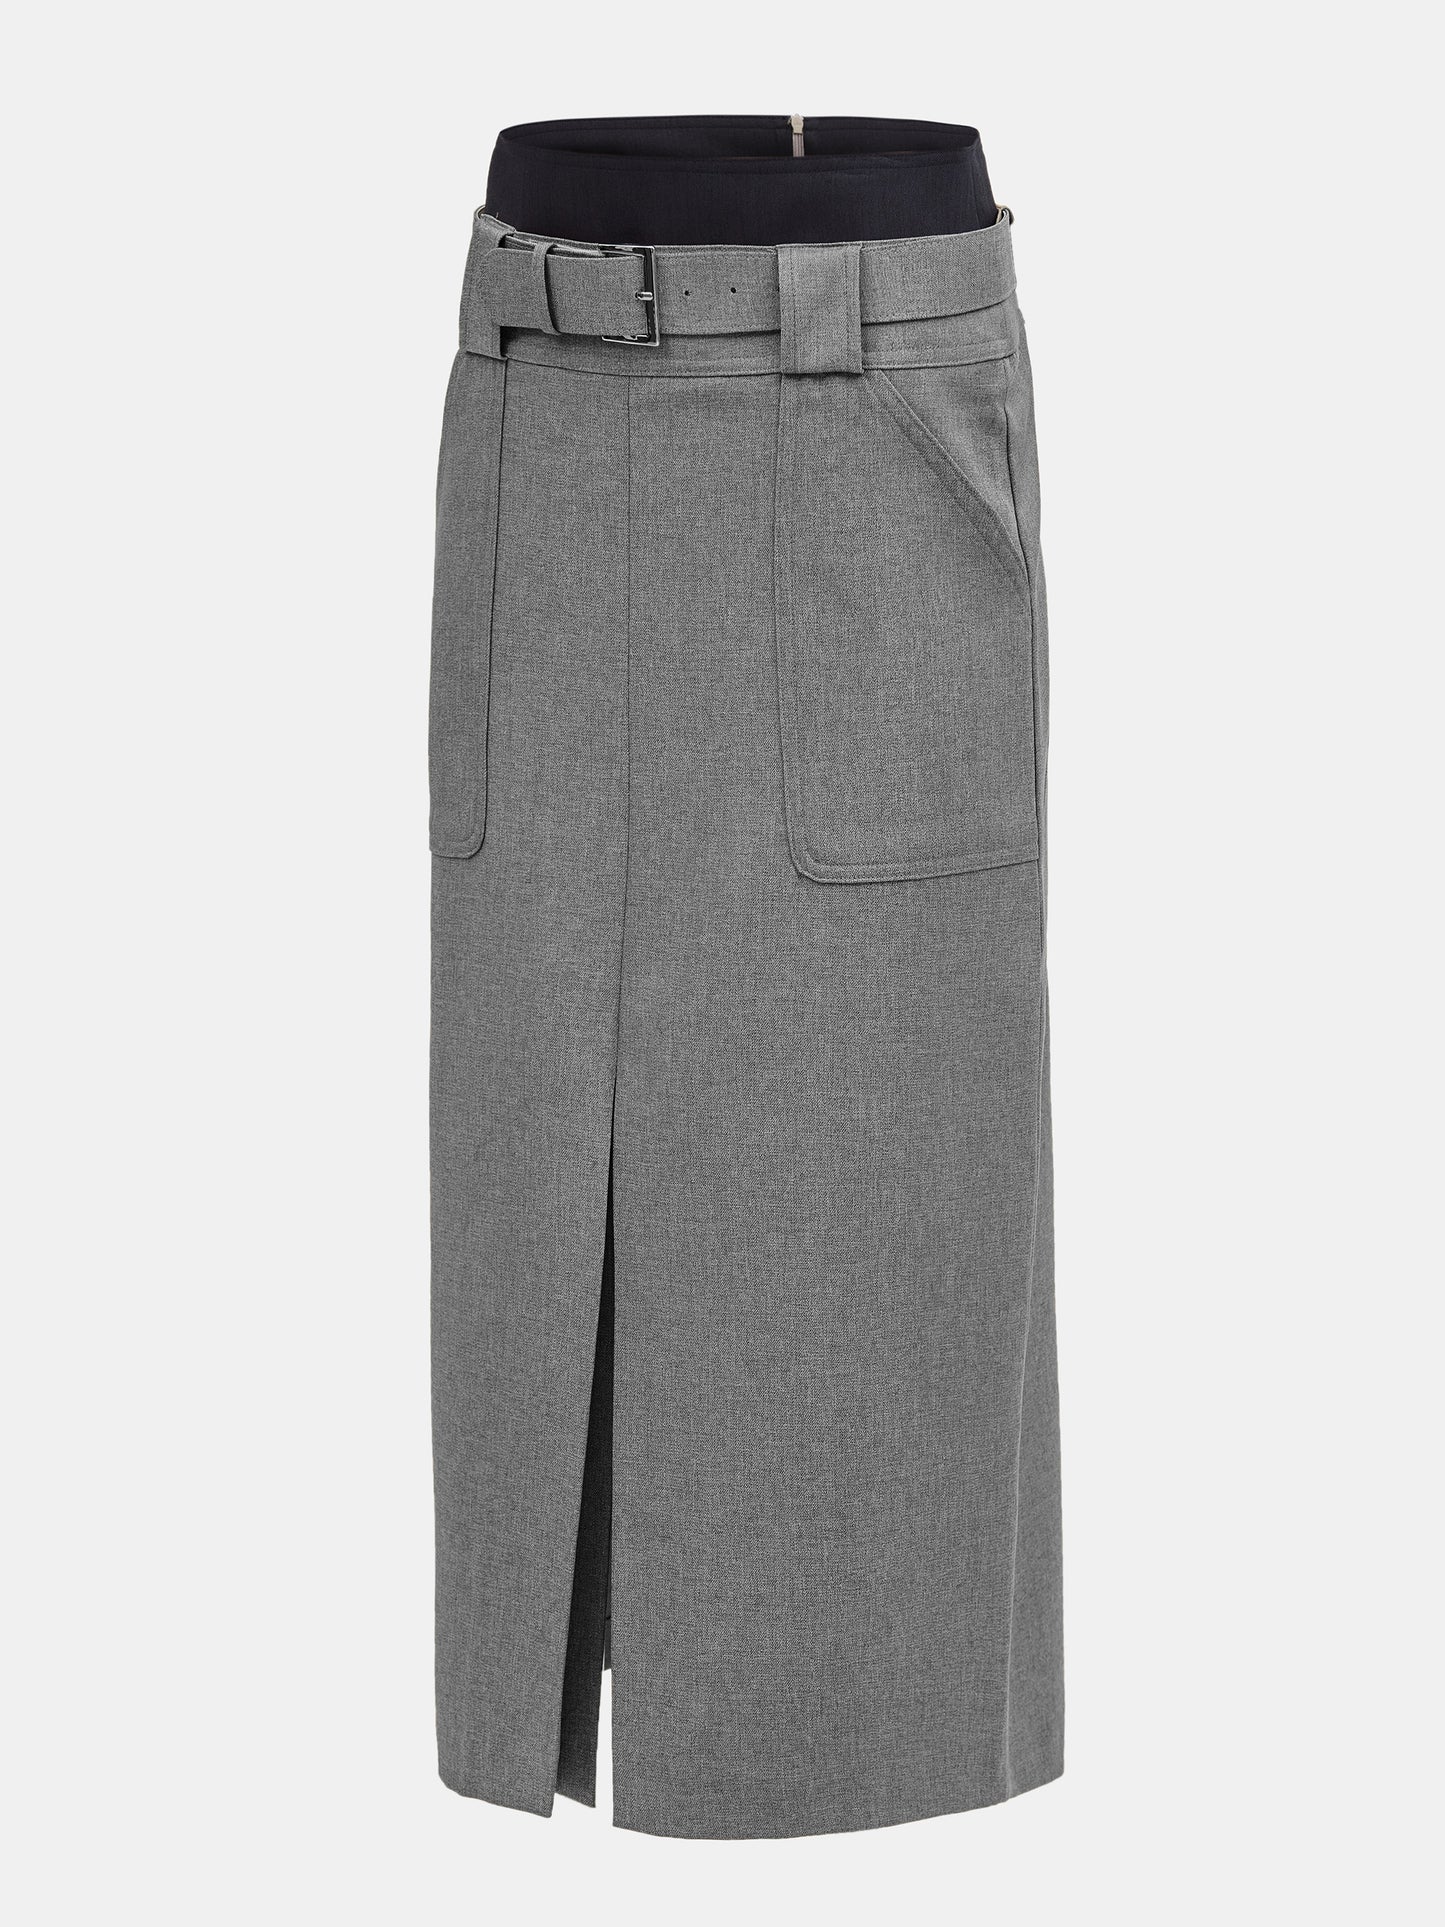 Belted Panel Suit Skirt, Grey